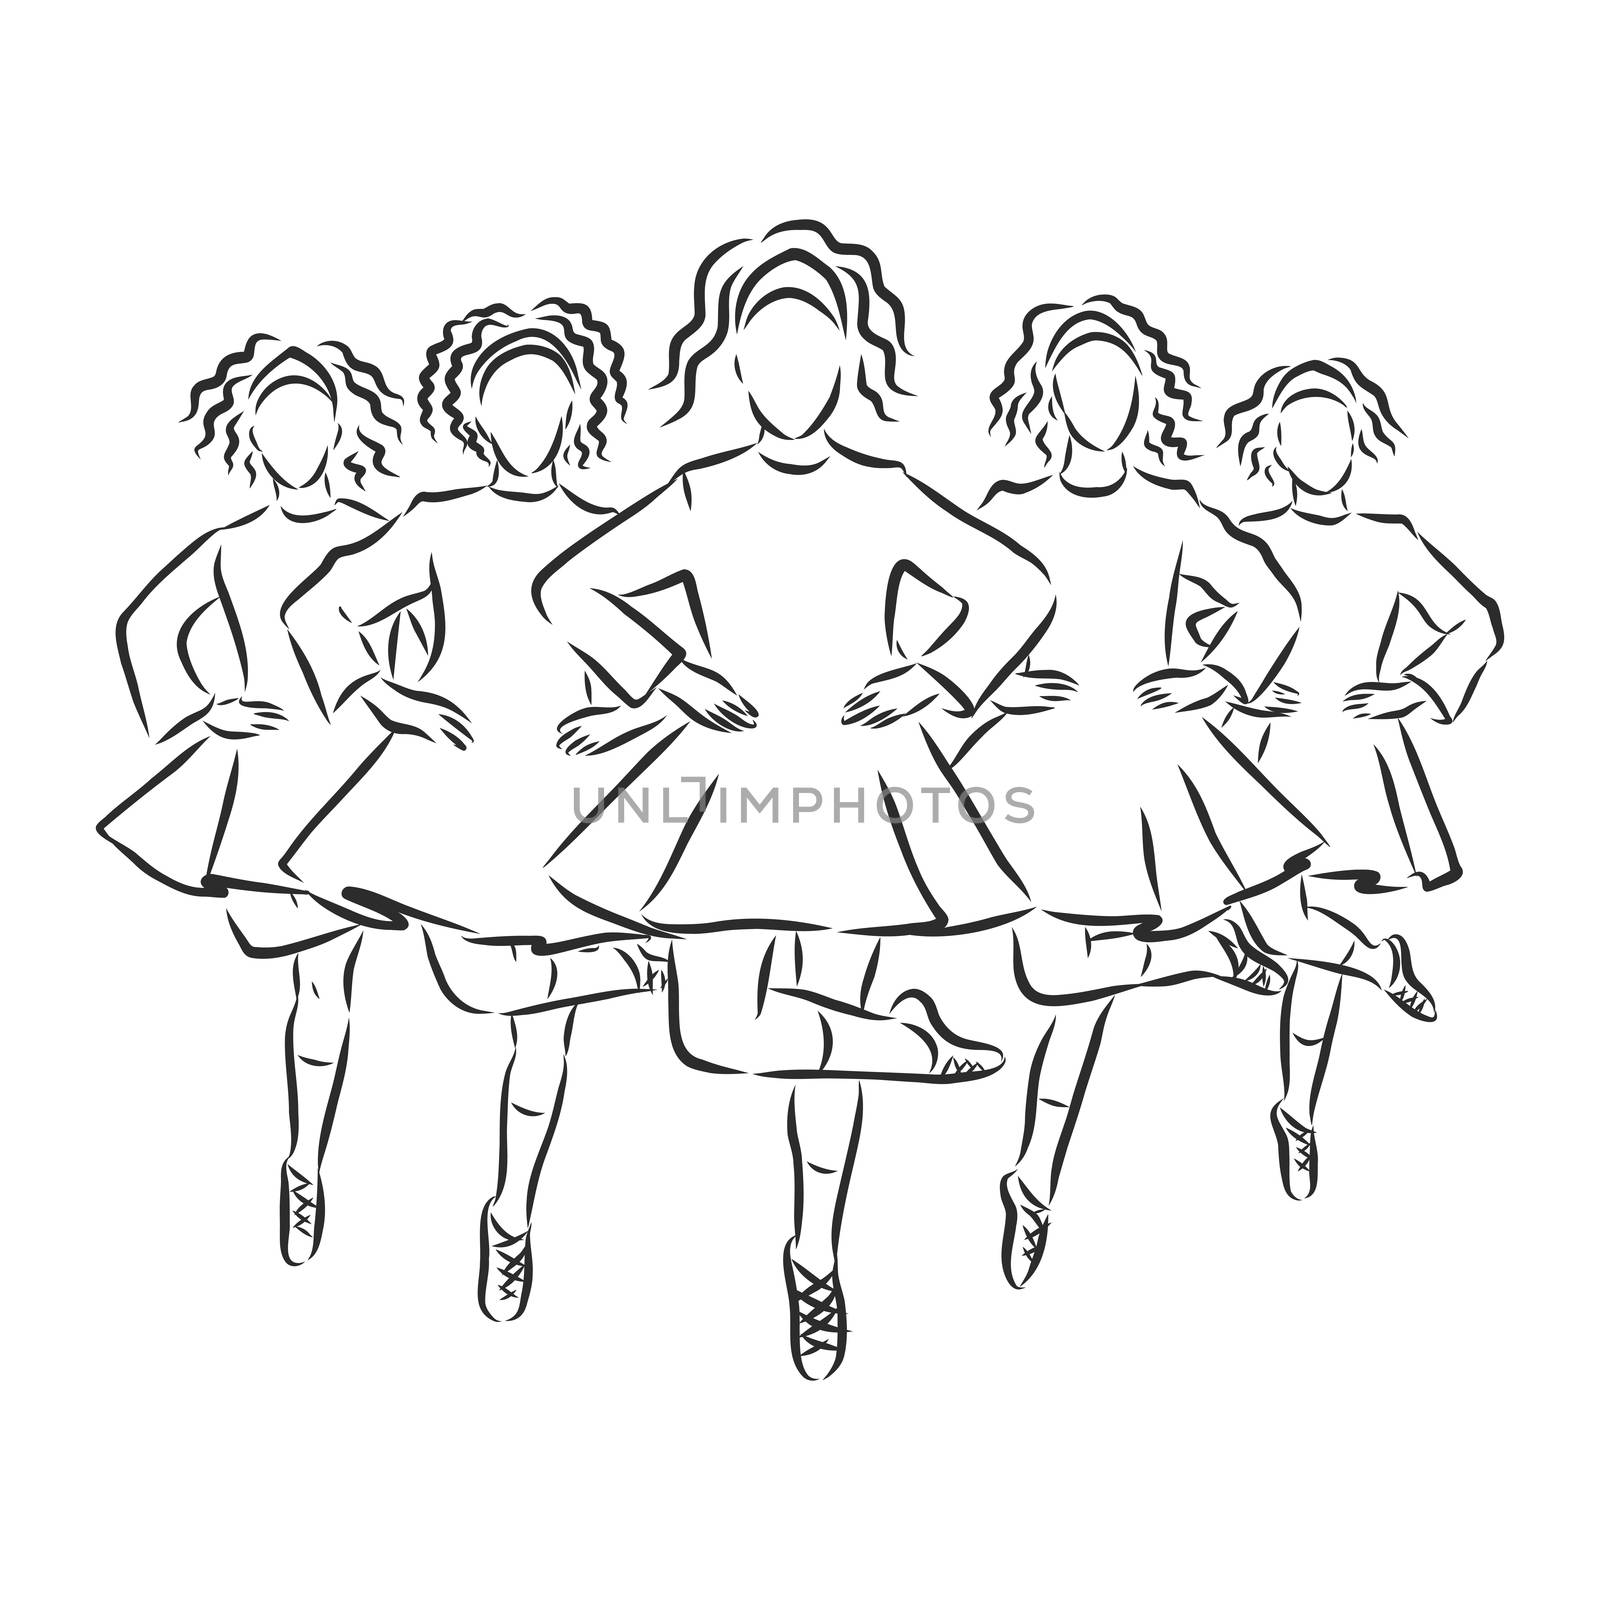 Irish Dance Troupe Jumping Together in Traditional Dresses and Ghillies. Irish dancing vector sketch illustration by ekaterina